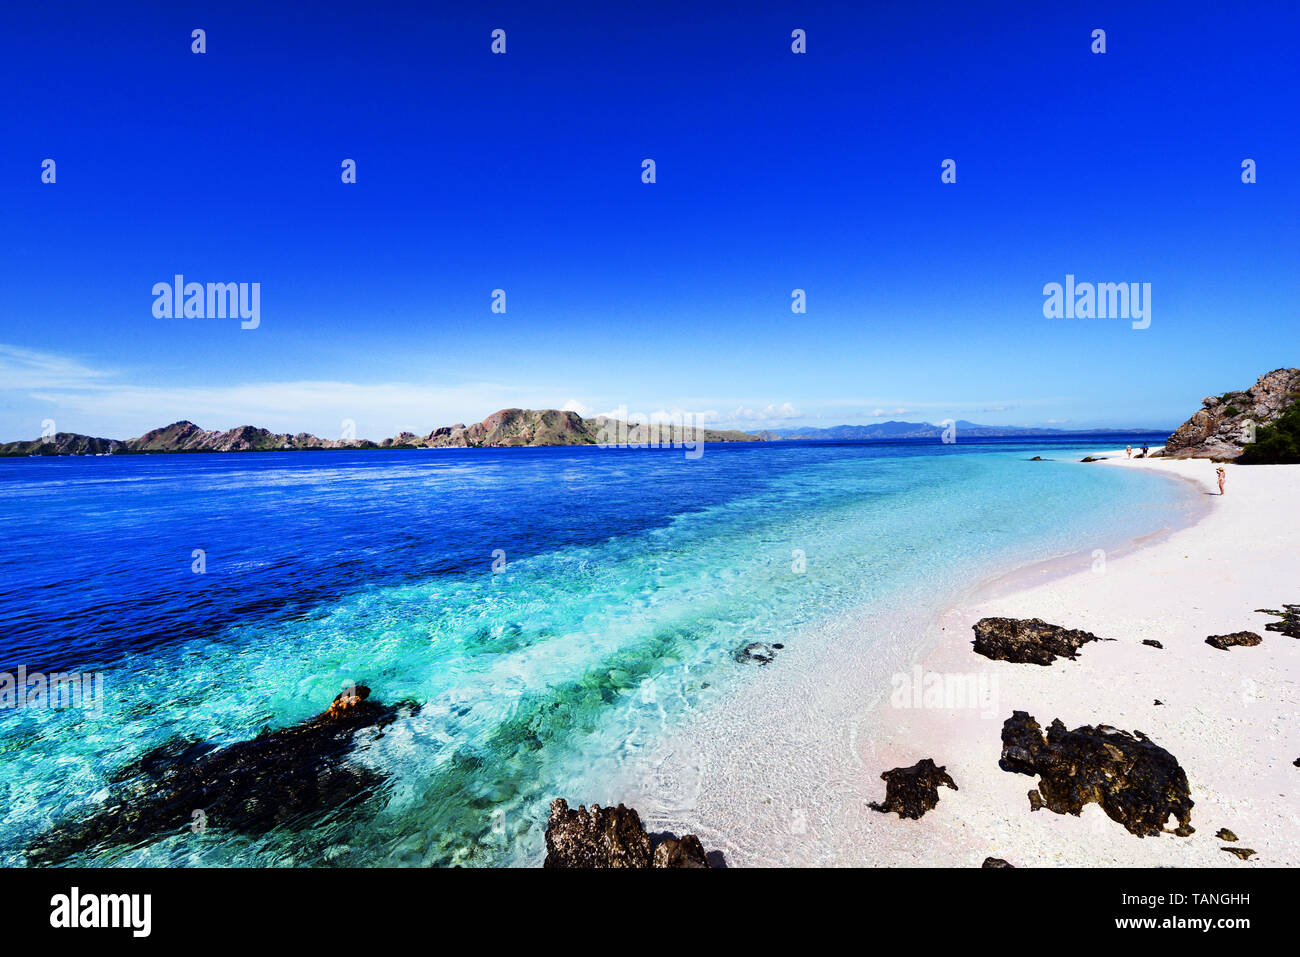 A beautiful white sand beach in Komodo national park in Indonesia. Stock Photo